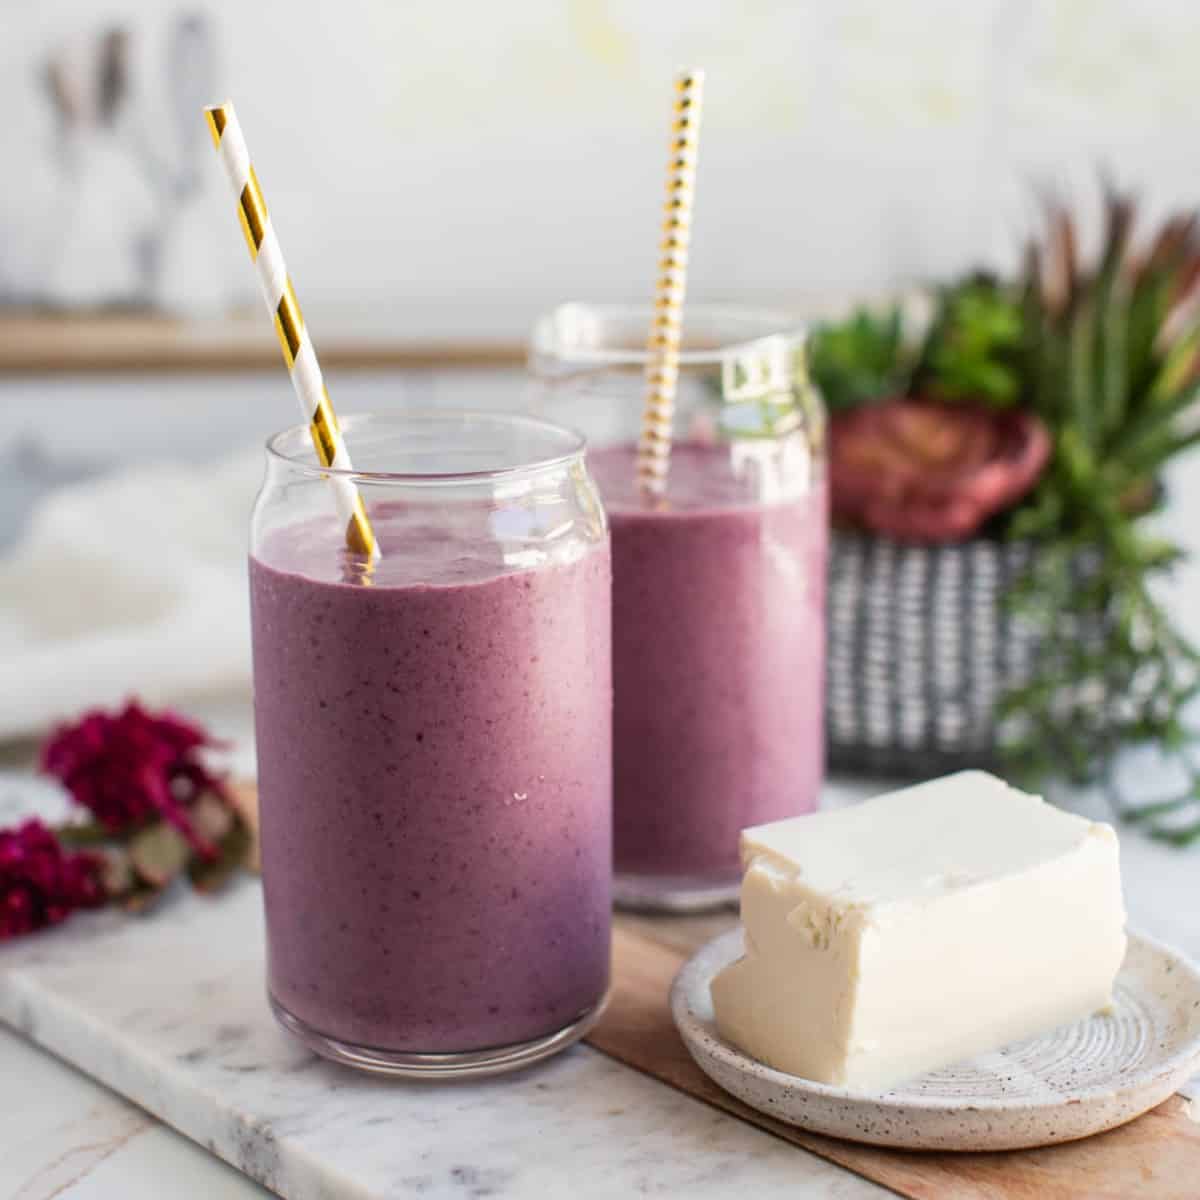 Two cups of purple cherry smoothie made with silken tofu with a block of open silken tofu next to them.